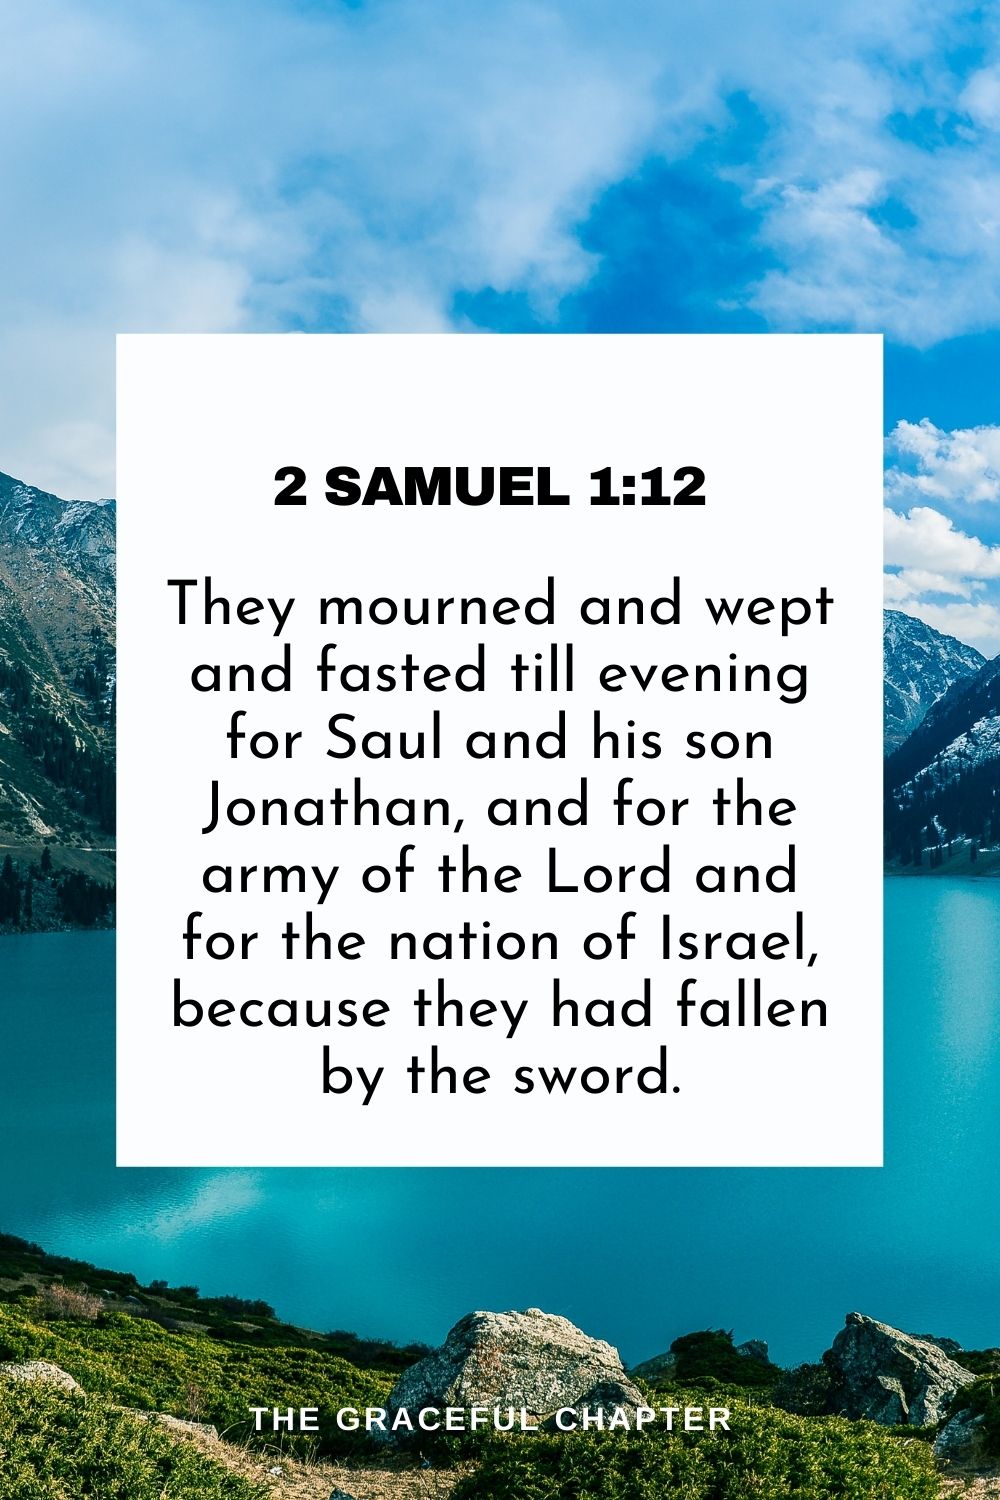 They mourned and wept and fasted till evening for Saul and his son Jonathan, and for the army of the Lord and for the nation of Israel, because they had fallen by the sword. 2 Samuel 1:12